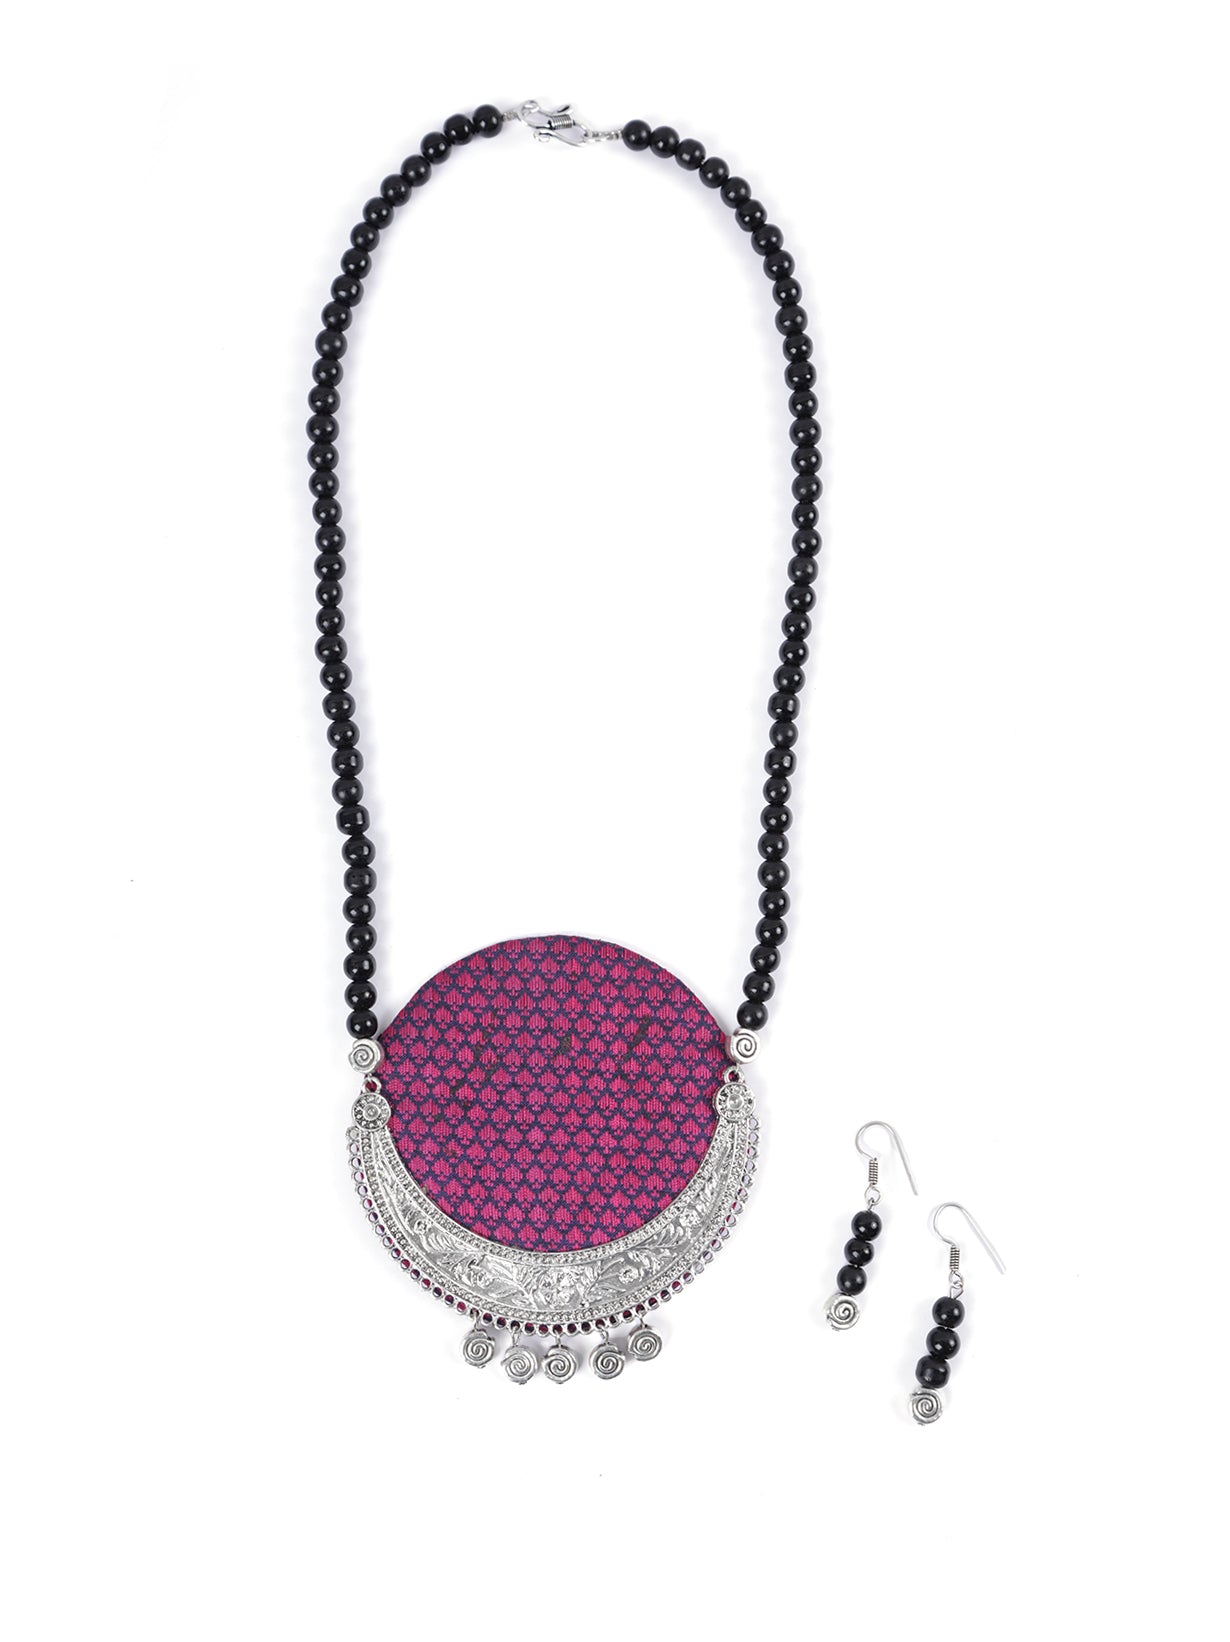 Fabric Necklace Set with Black Beads and Silver Finish Metal Pendant